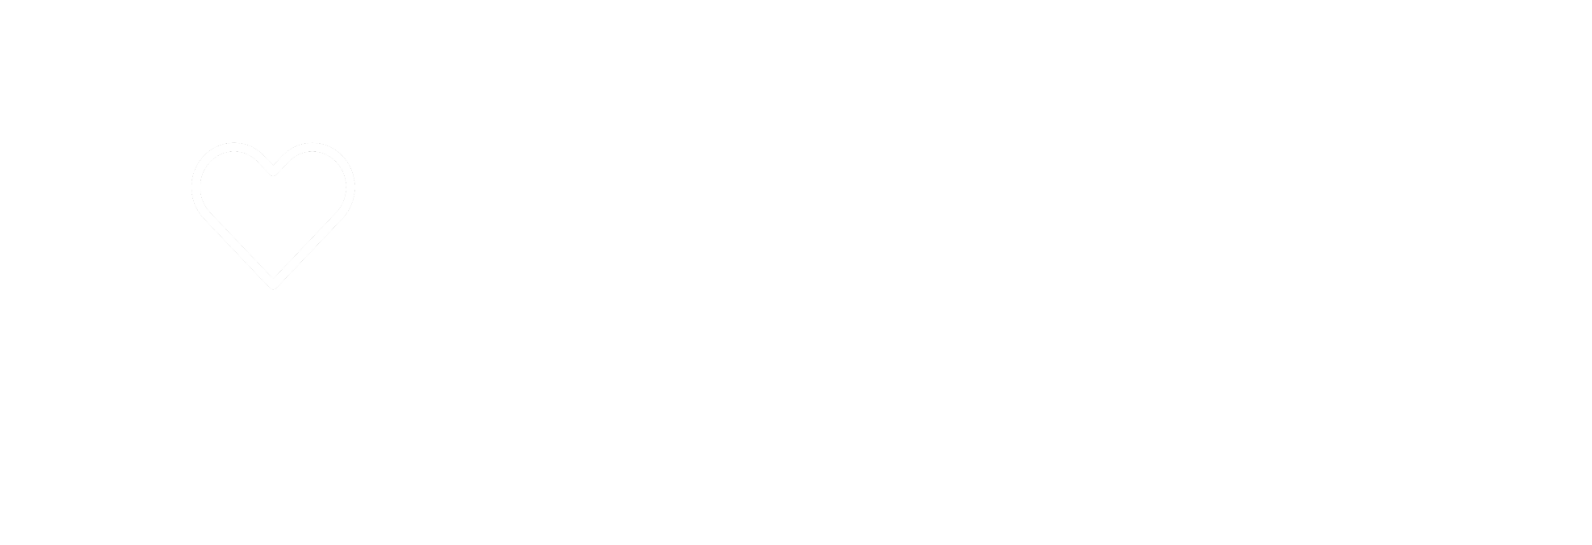 Julie Stein Counseling